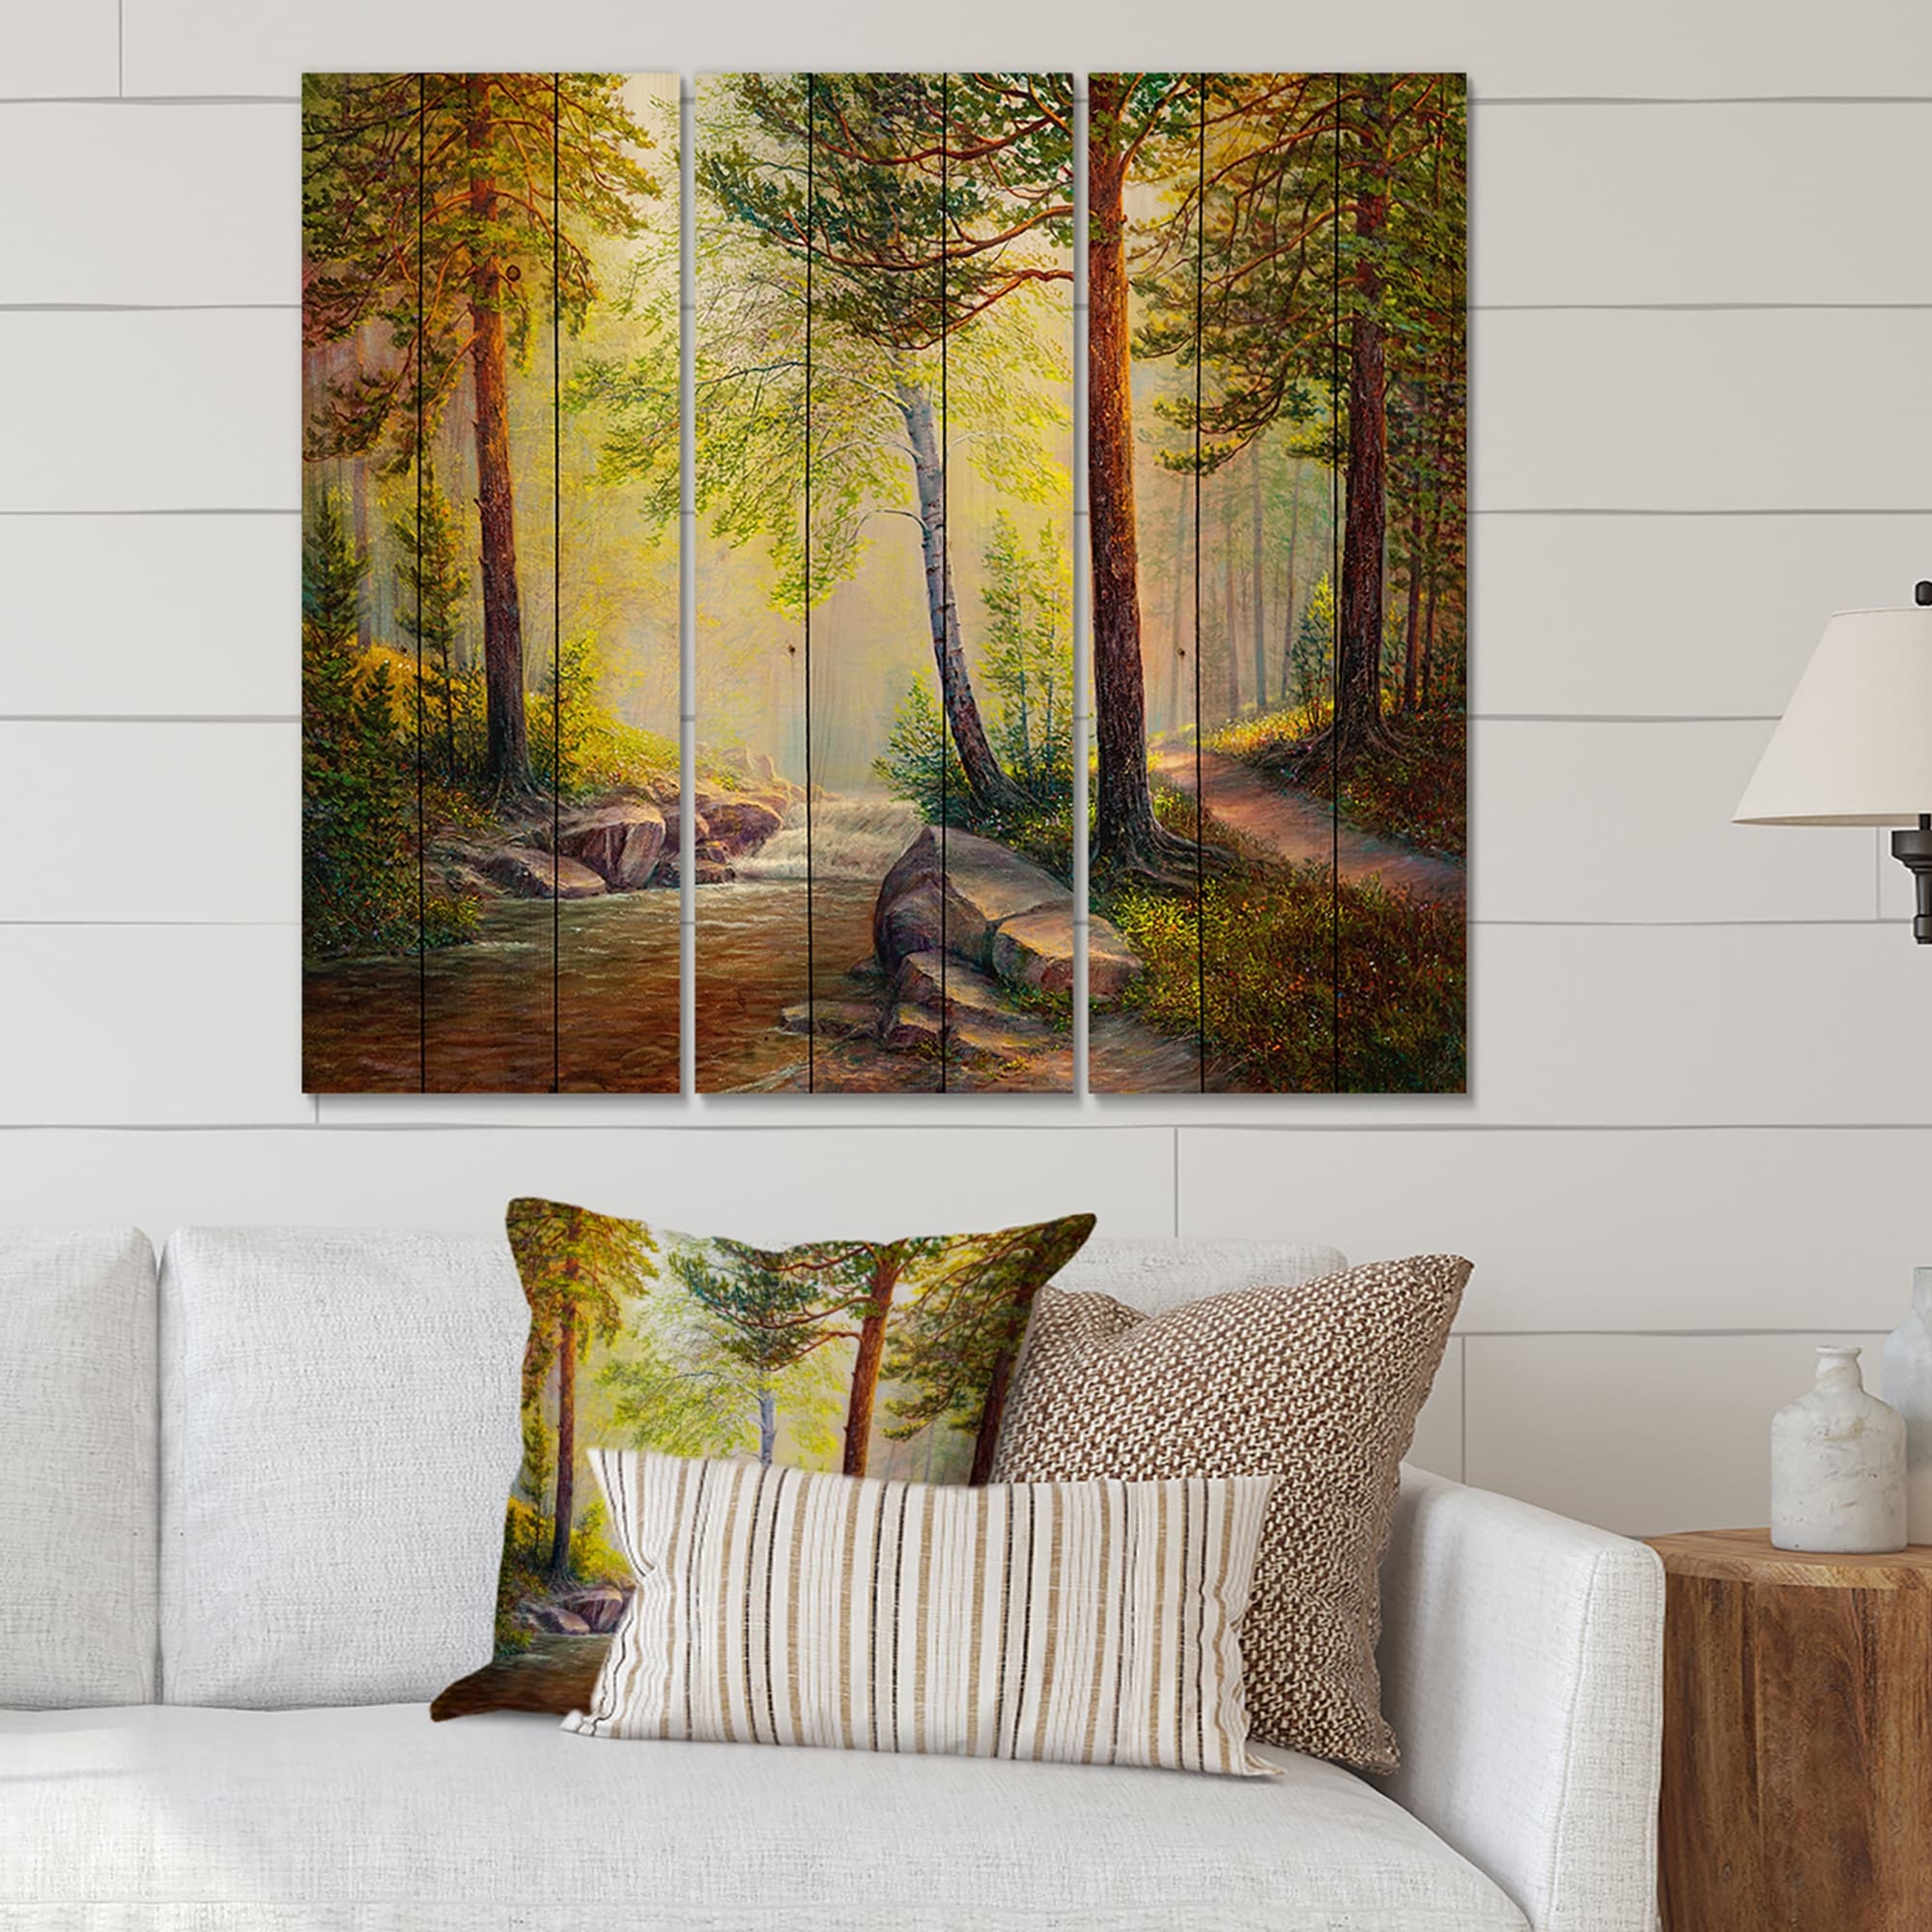 Designart 'Afternoon Light Through The Trees In The Forest' Traditional  Print on Natural Pine Wood Panels Bed Bath  Beyond 35032035